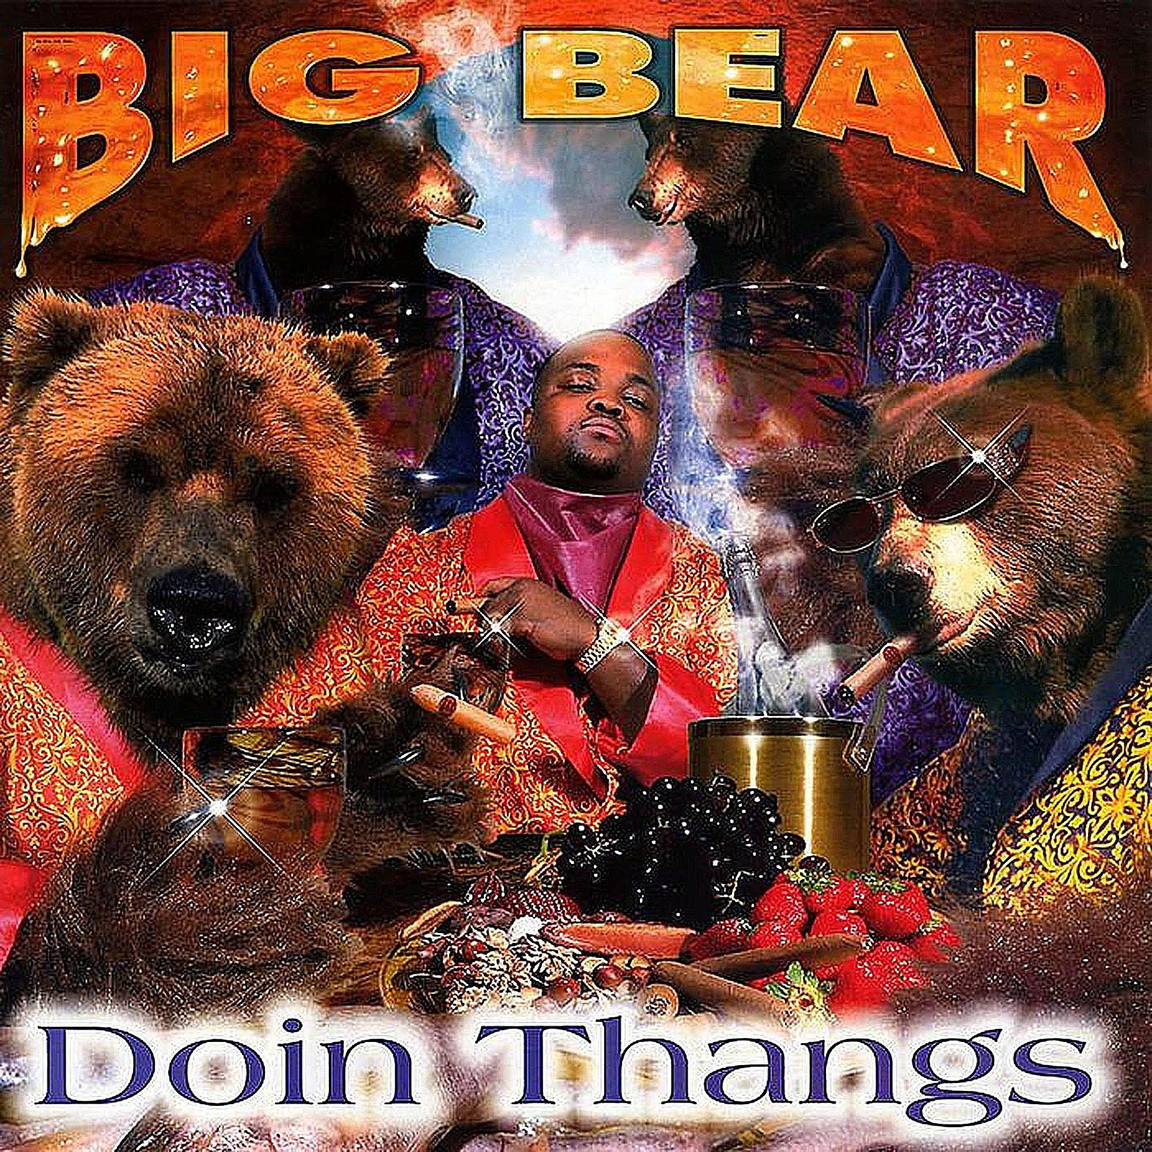 Kings of Bling: Big Bear – Doin thangs: an example of PPG infamous work.